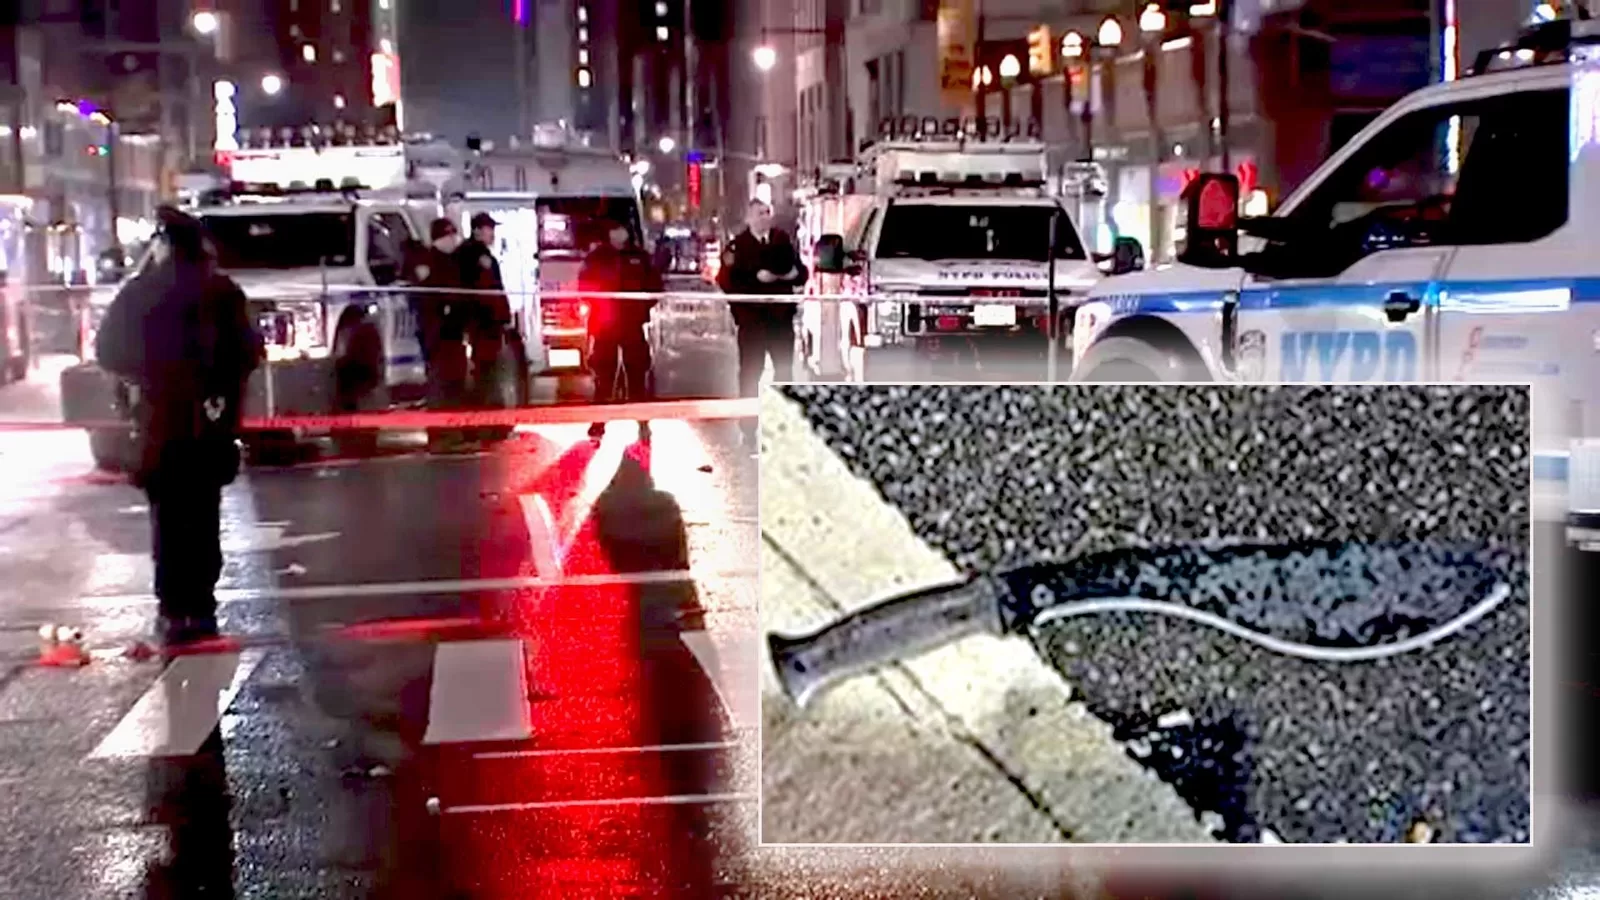 NYC Crime: Machete attack on NYPD officers near Times Square on New Year's Eve investigated as possible terrorism